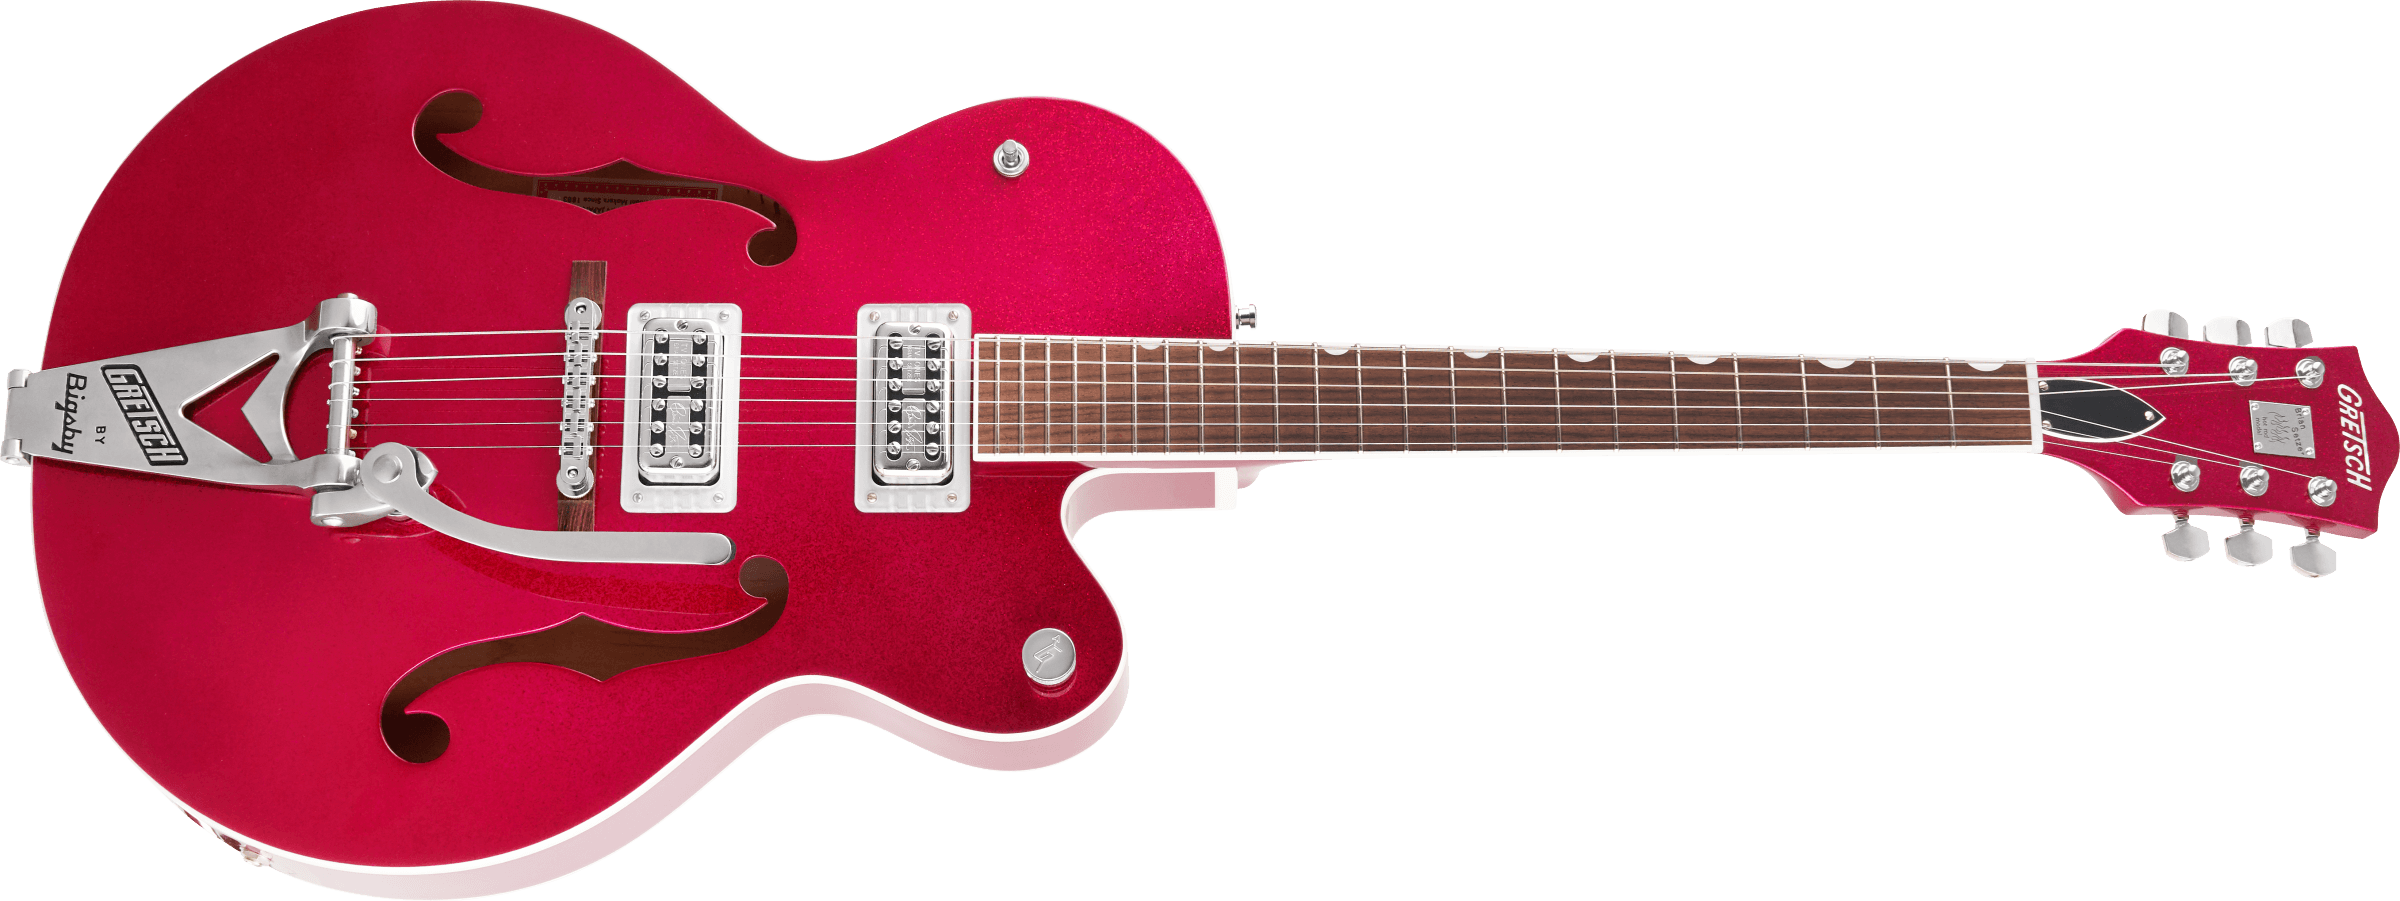 G6120T-HR Brian Setzer Signature Hot Rod Hollow Body with Bigsby, Rosewood Fingerboard, Magenta Sparkle追加画像